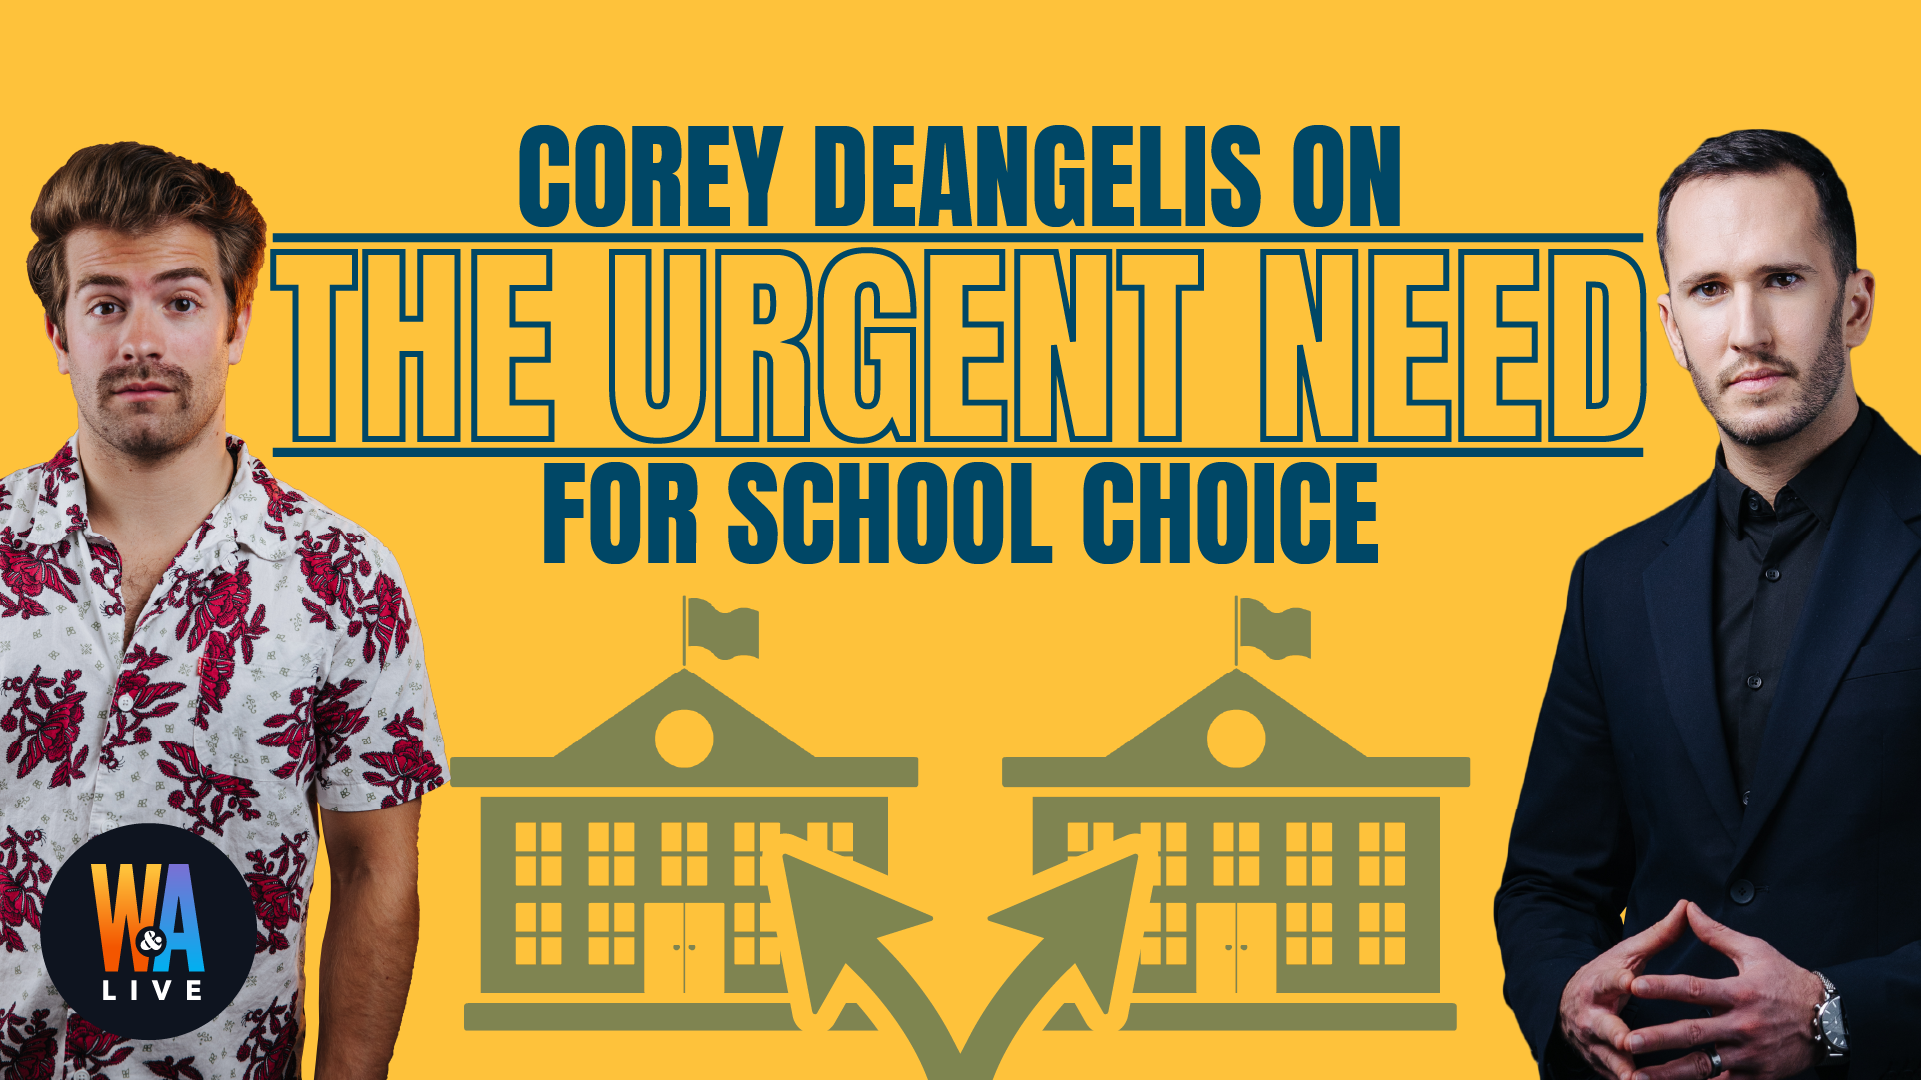 Corey DeAngelis on the Urgent Need for School Choice